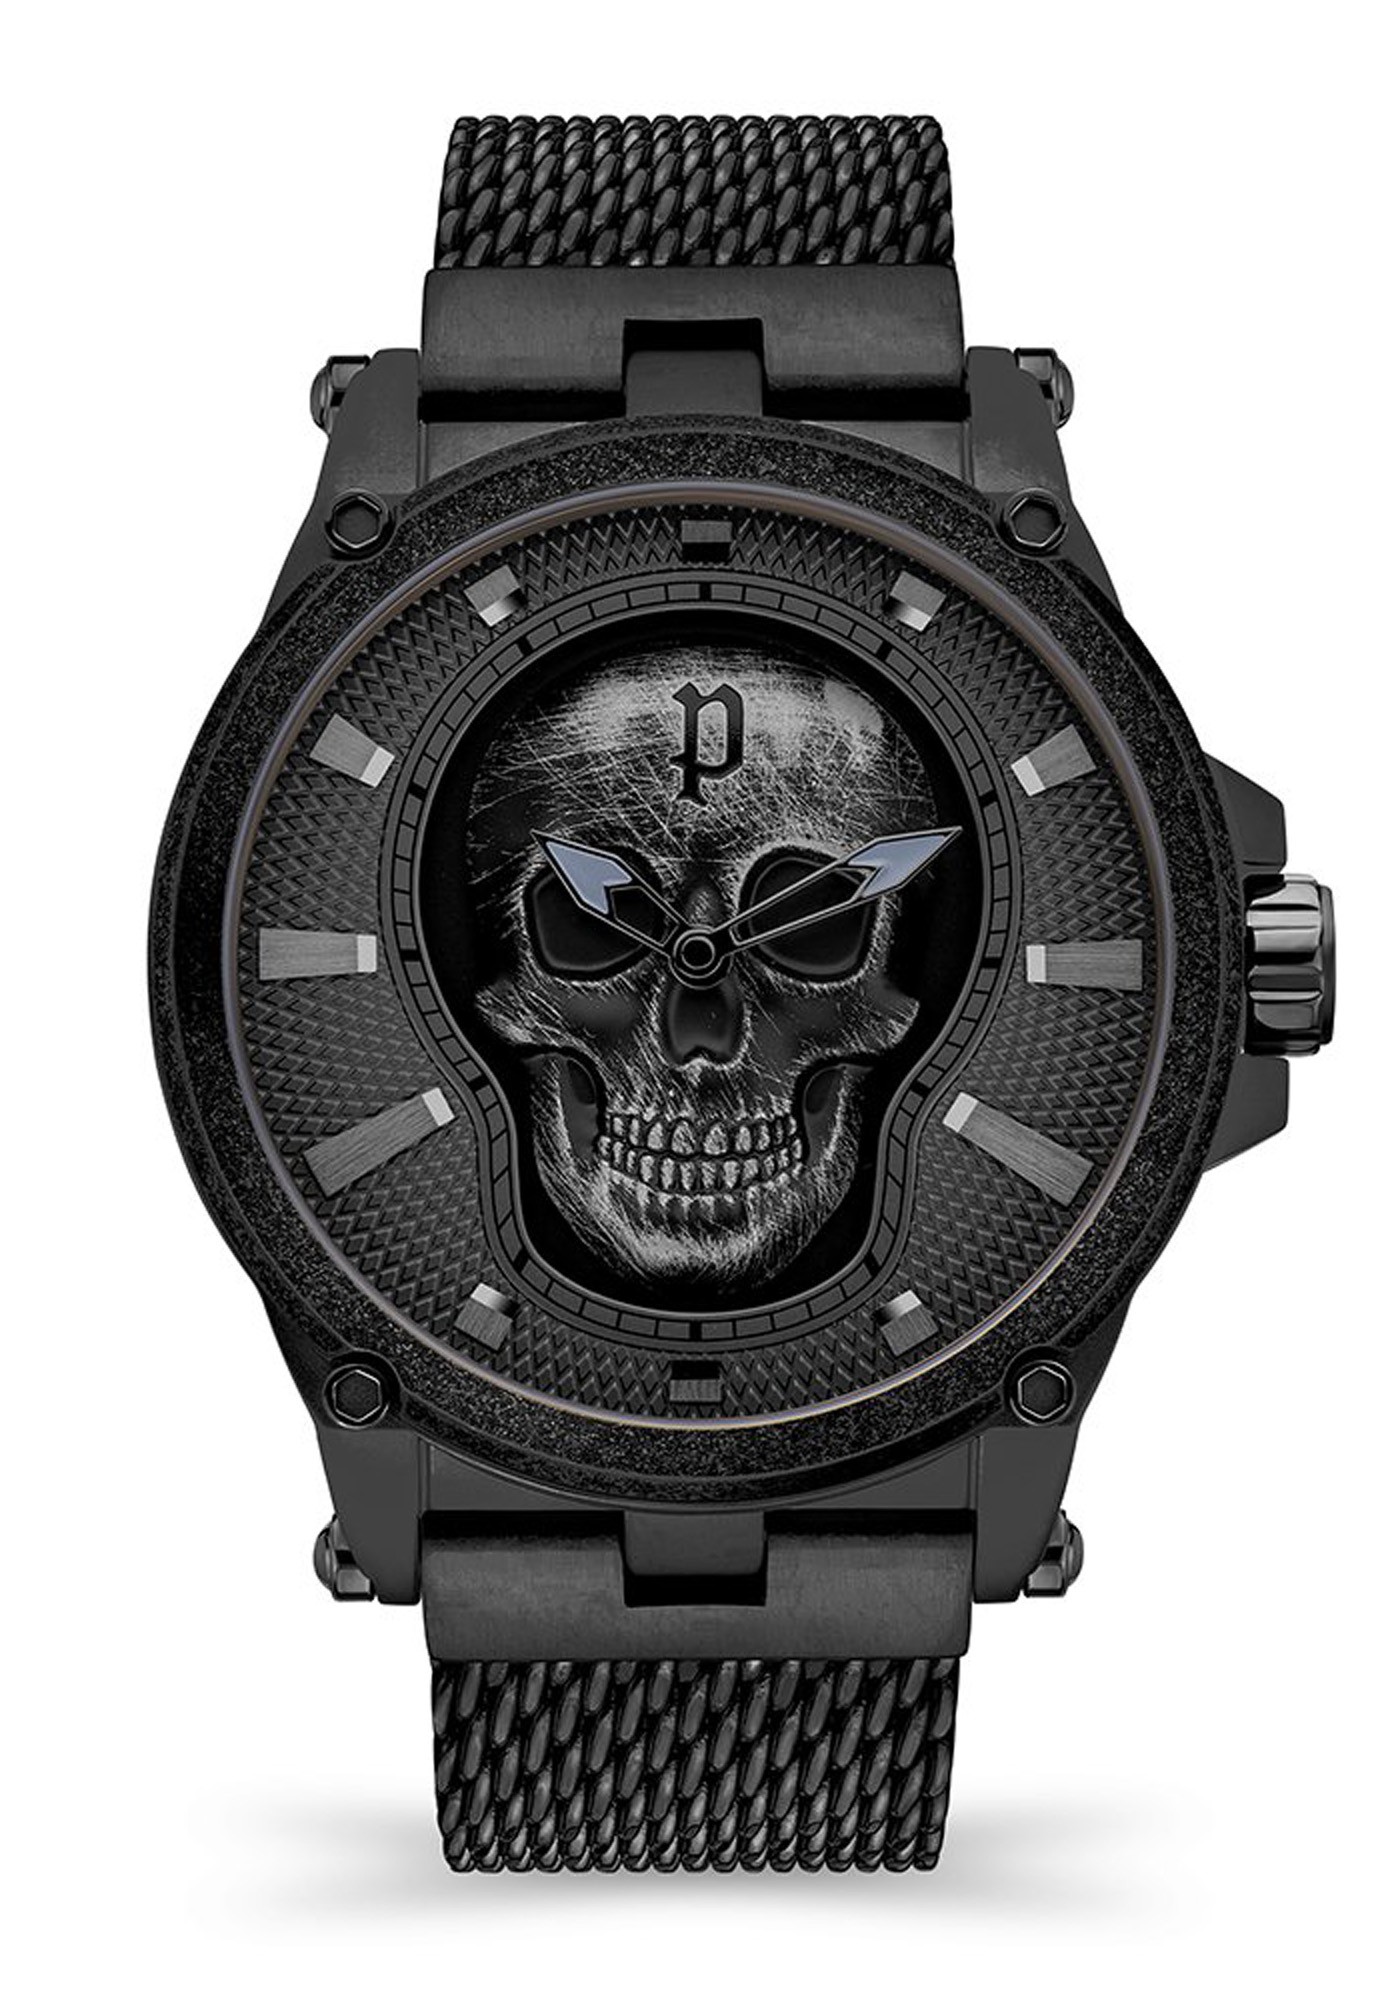 Stainless Skull Men\'s Black 152230 PEWJG2108502 on Police Watch Comprar Featuring Skull Steel Watch on Police Featuring Steel Stainless Watches Vertex Police Dial Vertex | Black Watches Men\'s Watch Men\'s Dial Watch